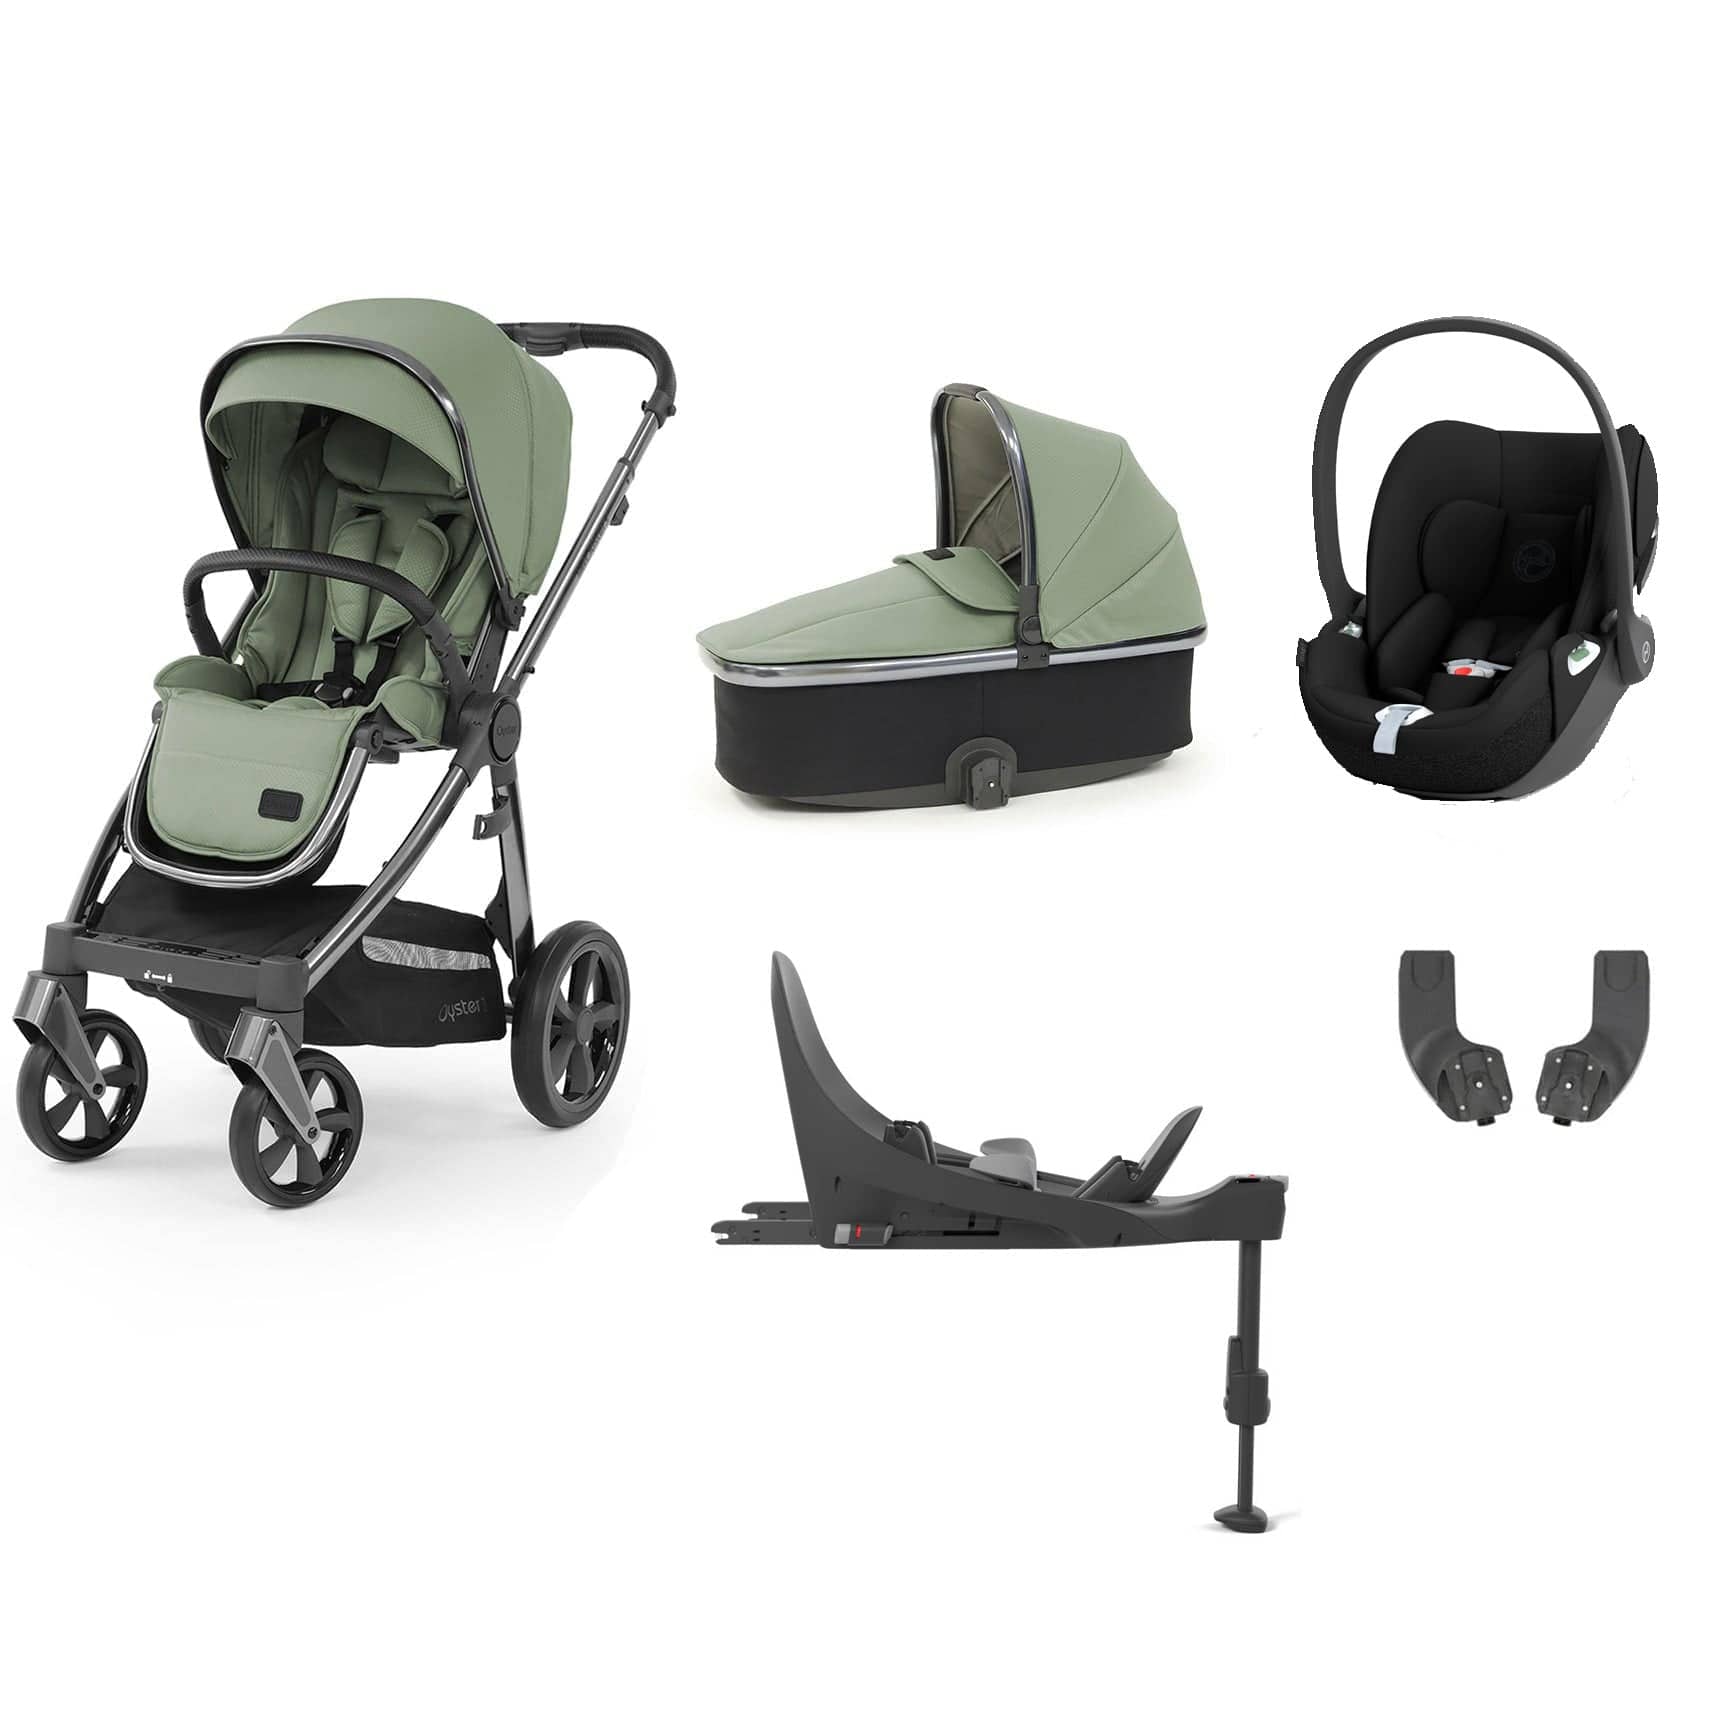 Babystyle Oyster 3 Essential Bundle with Car Seat in Spearmint Travel Systems 13527-SPM 5060711564425